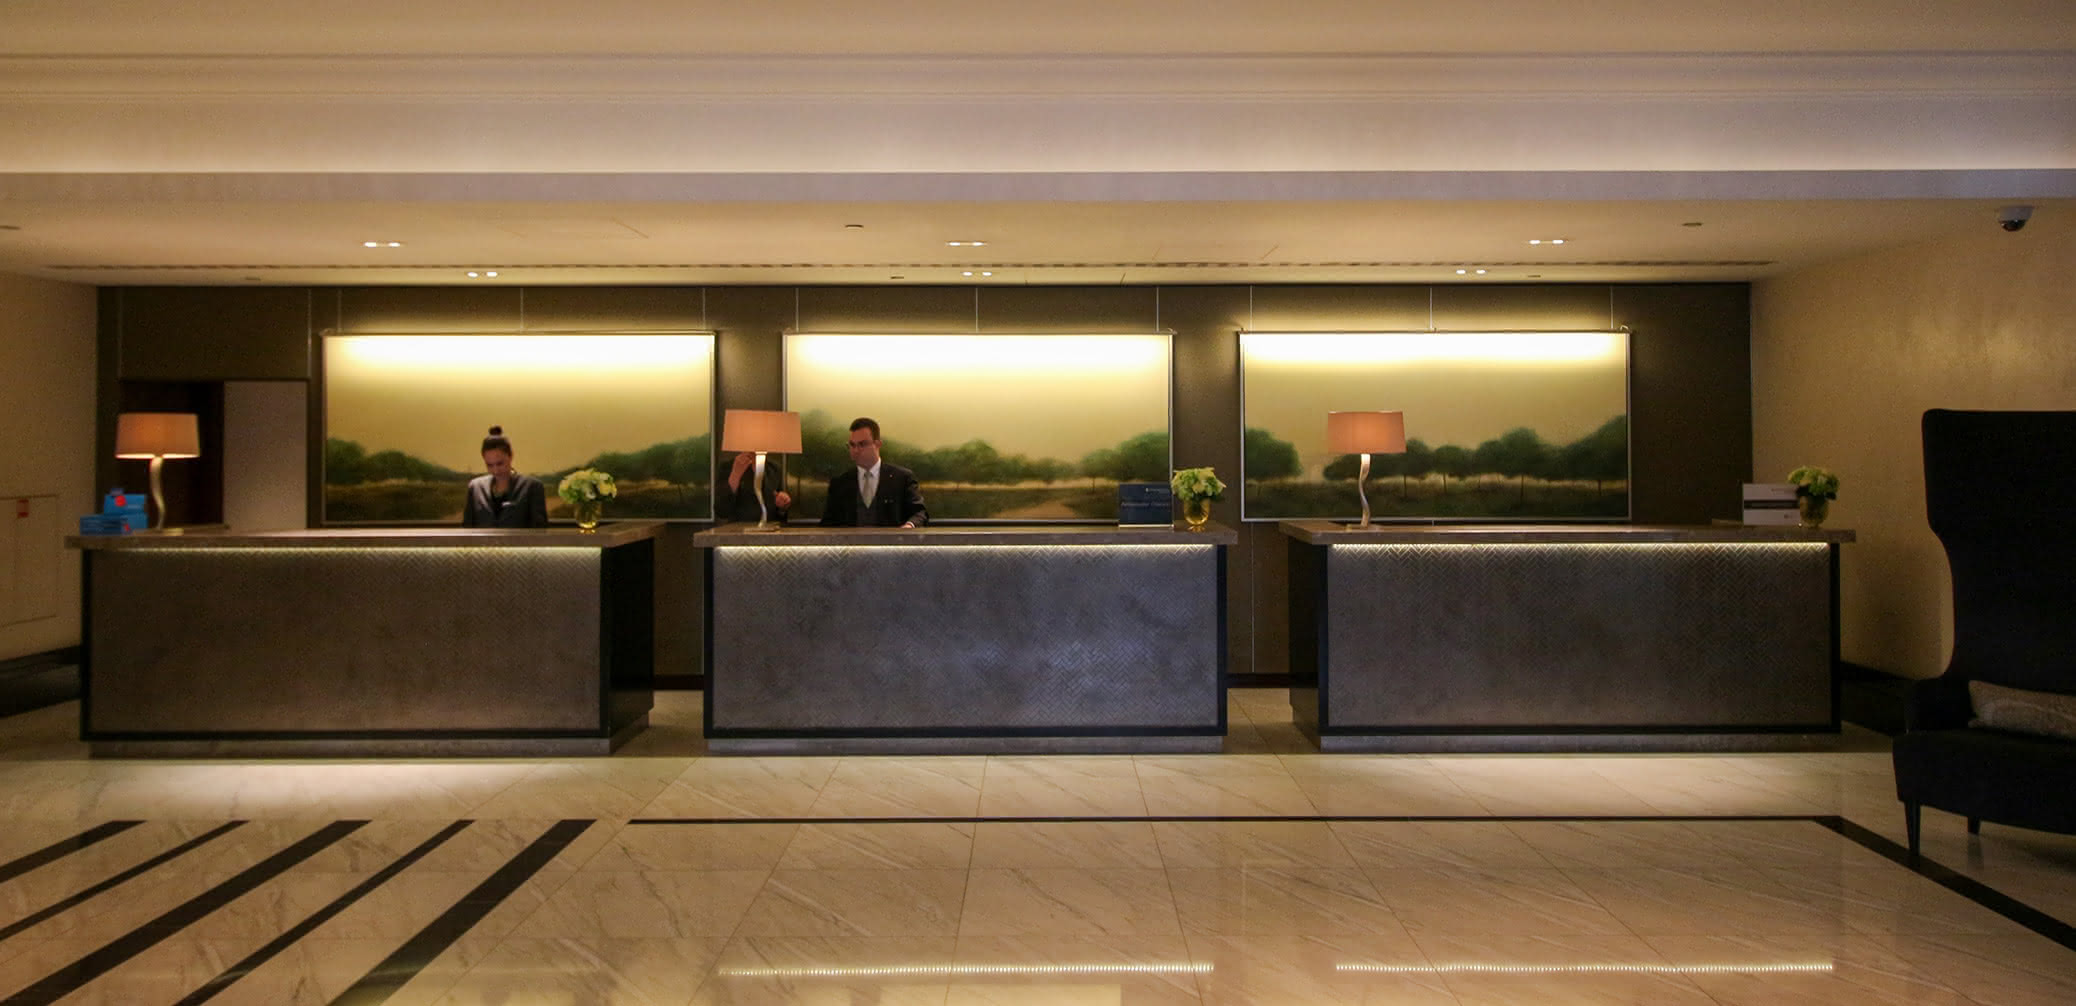 10 Tips For Getting A Late Checkout At An InterContinental Hotel